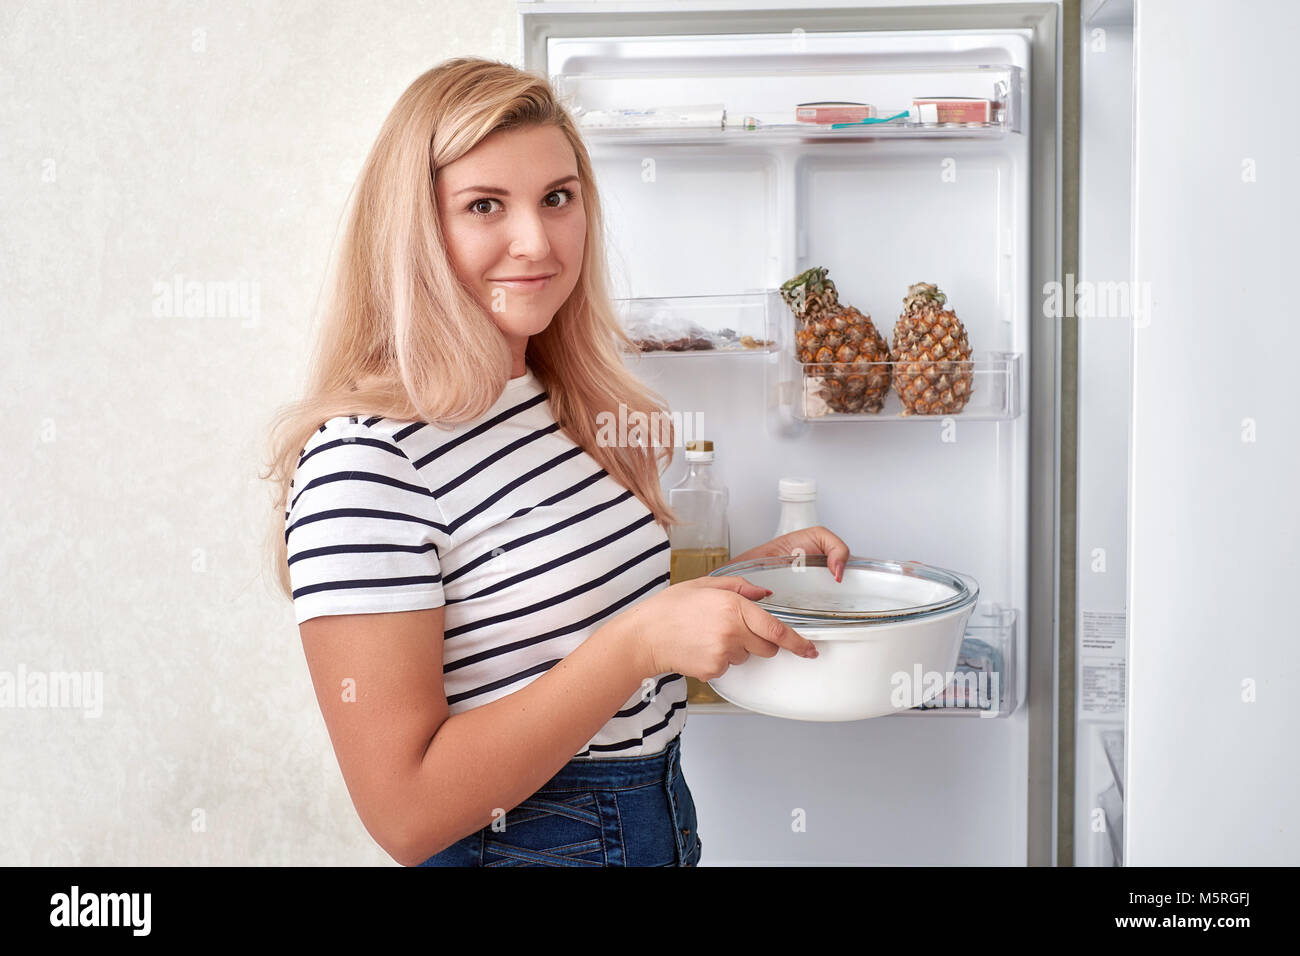 Woman choosing food in refrigerator at home Stock Photo